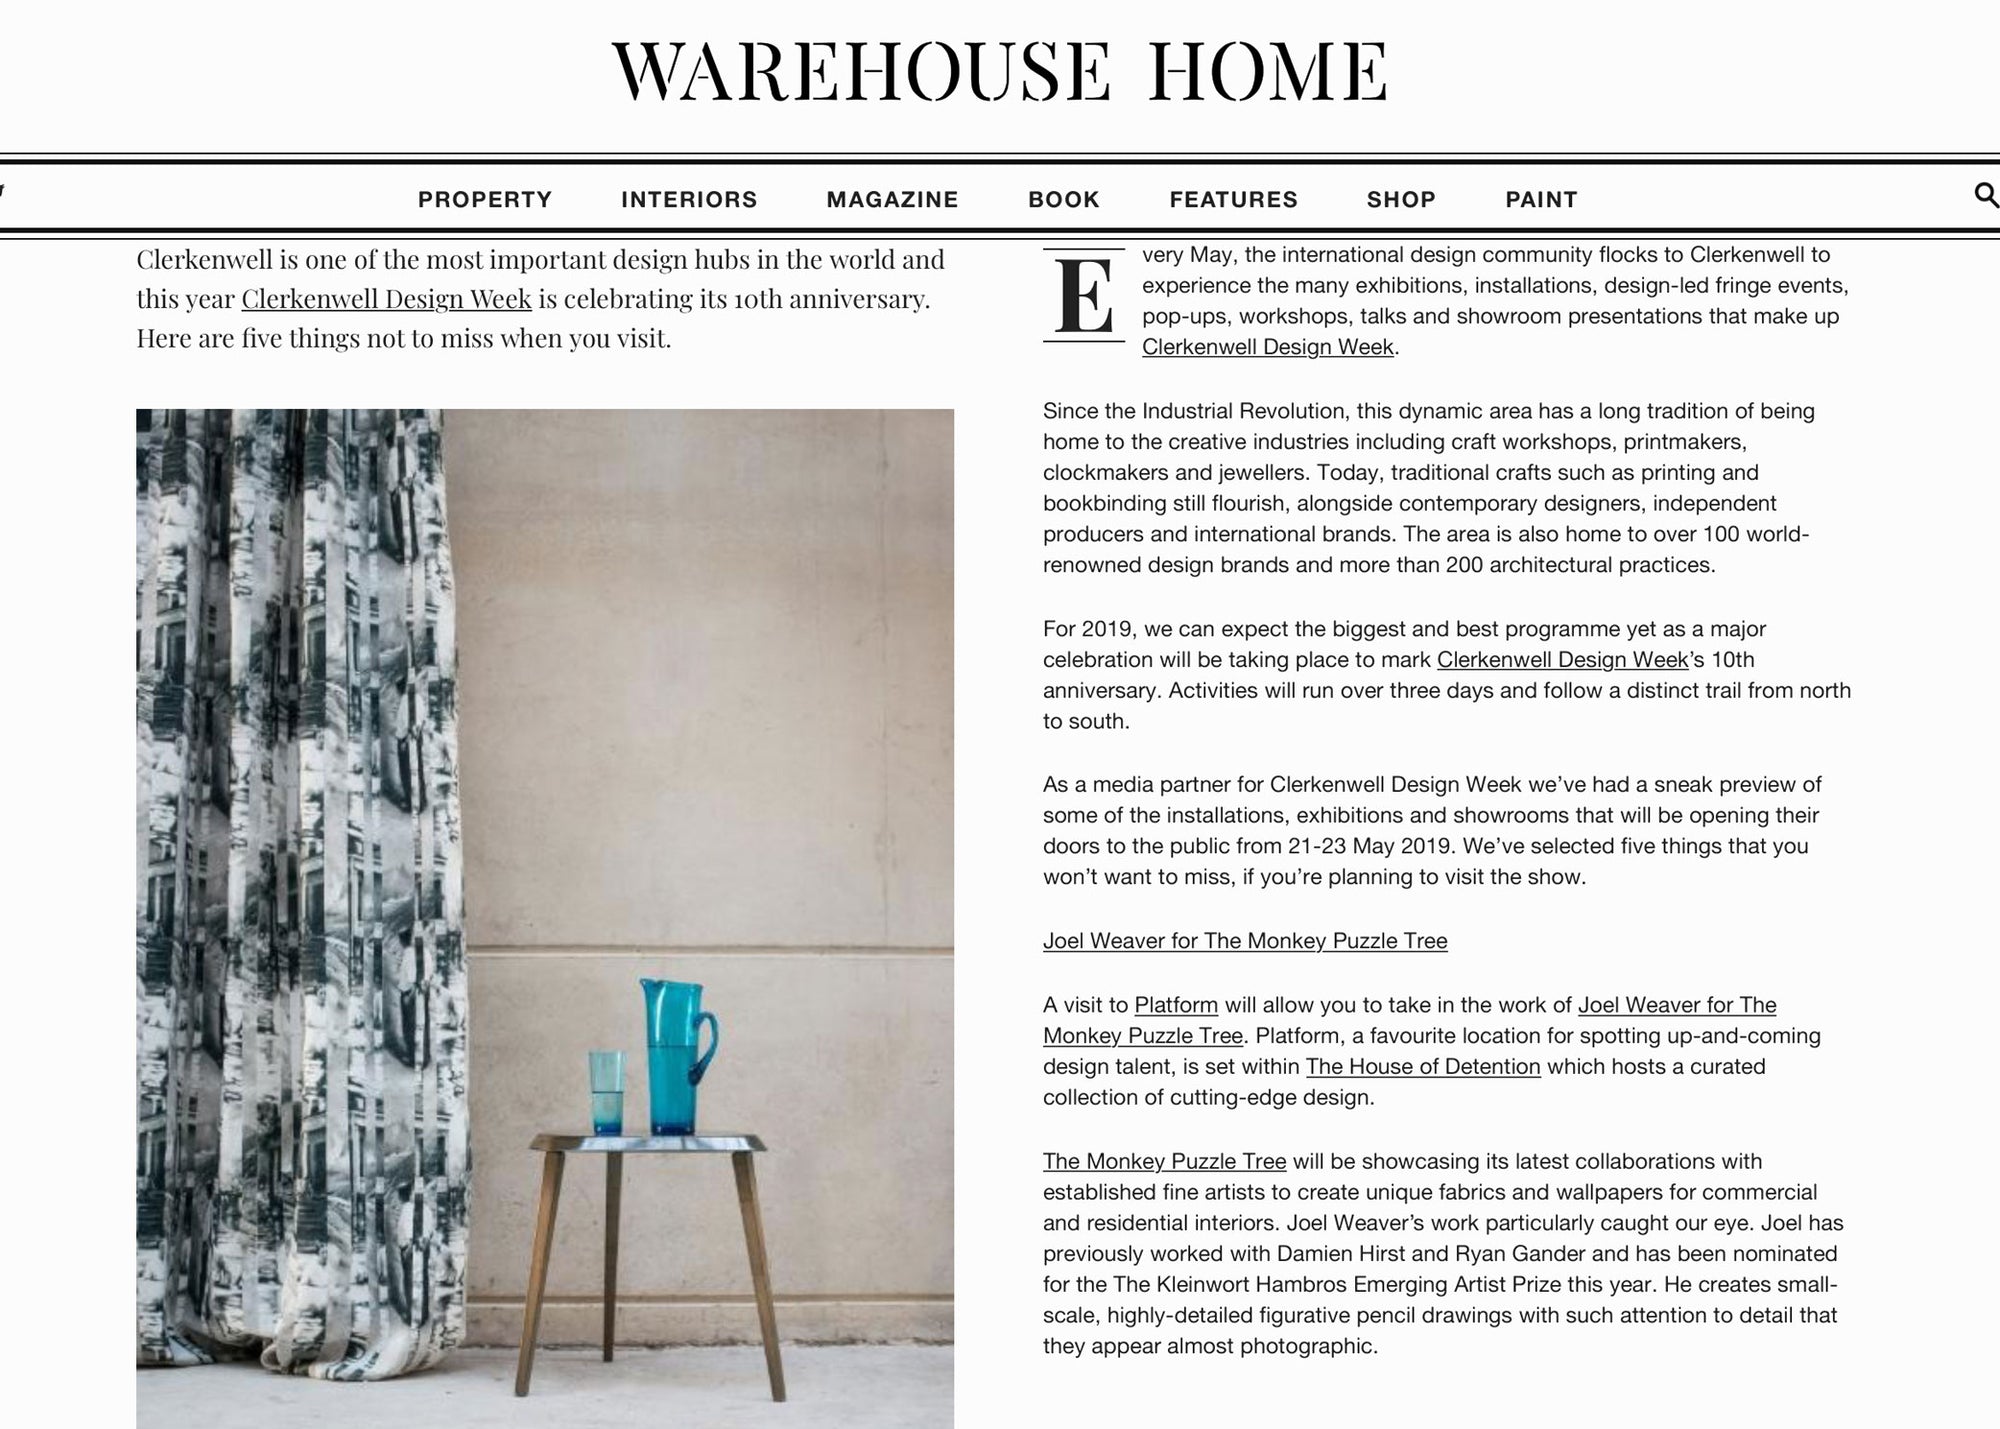 Warehouse Home Clerkenwell 2019 Featuring The Monkey Puzzle Tree